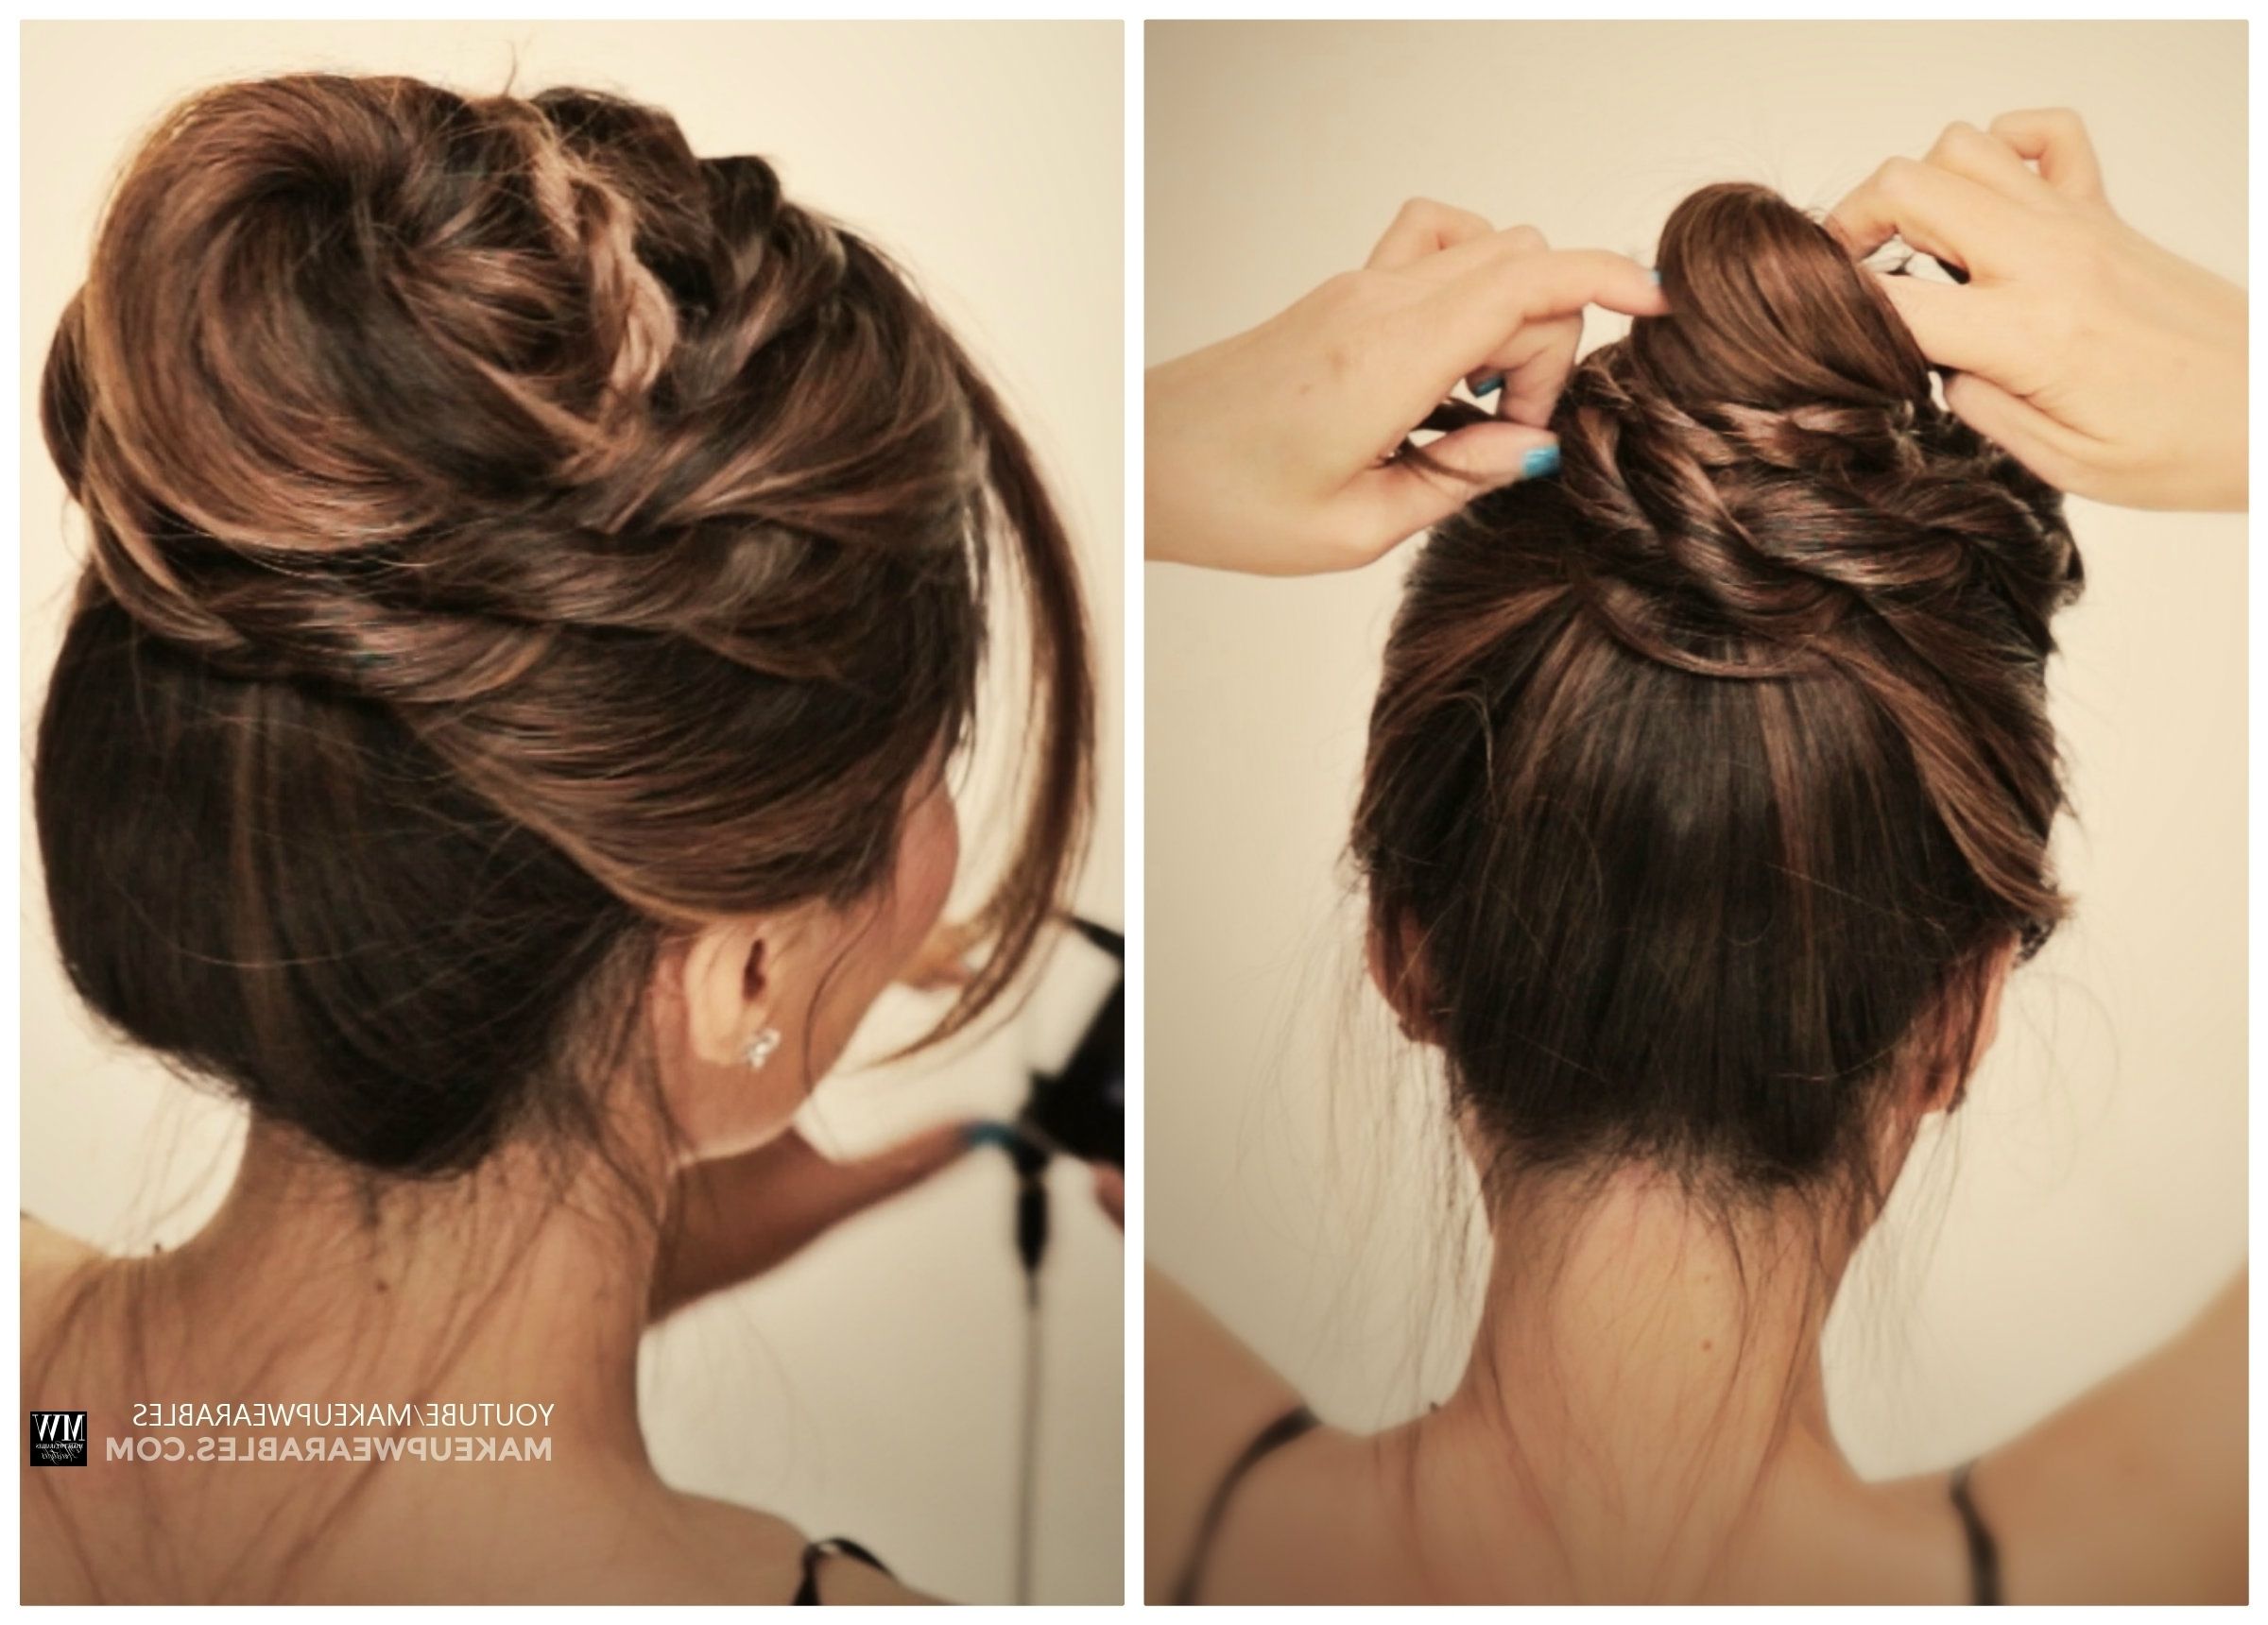 How To: 5 Amazingly Cute + Easy Hairstyles With A Simple Twist With Regard To Easy Hair Updos For Long Hair (View 9 of 15)